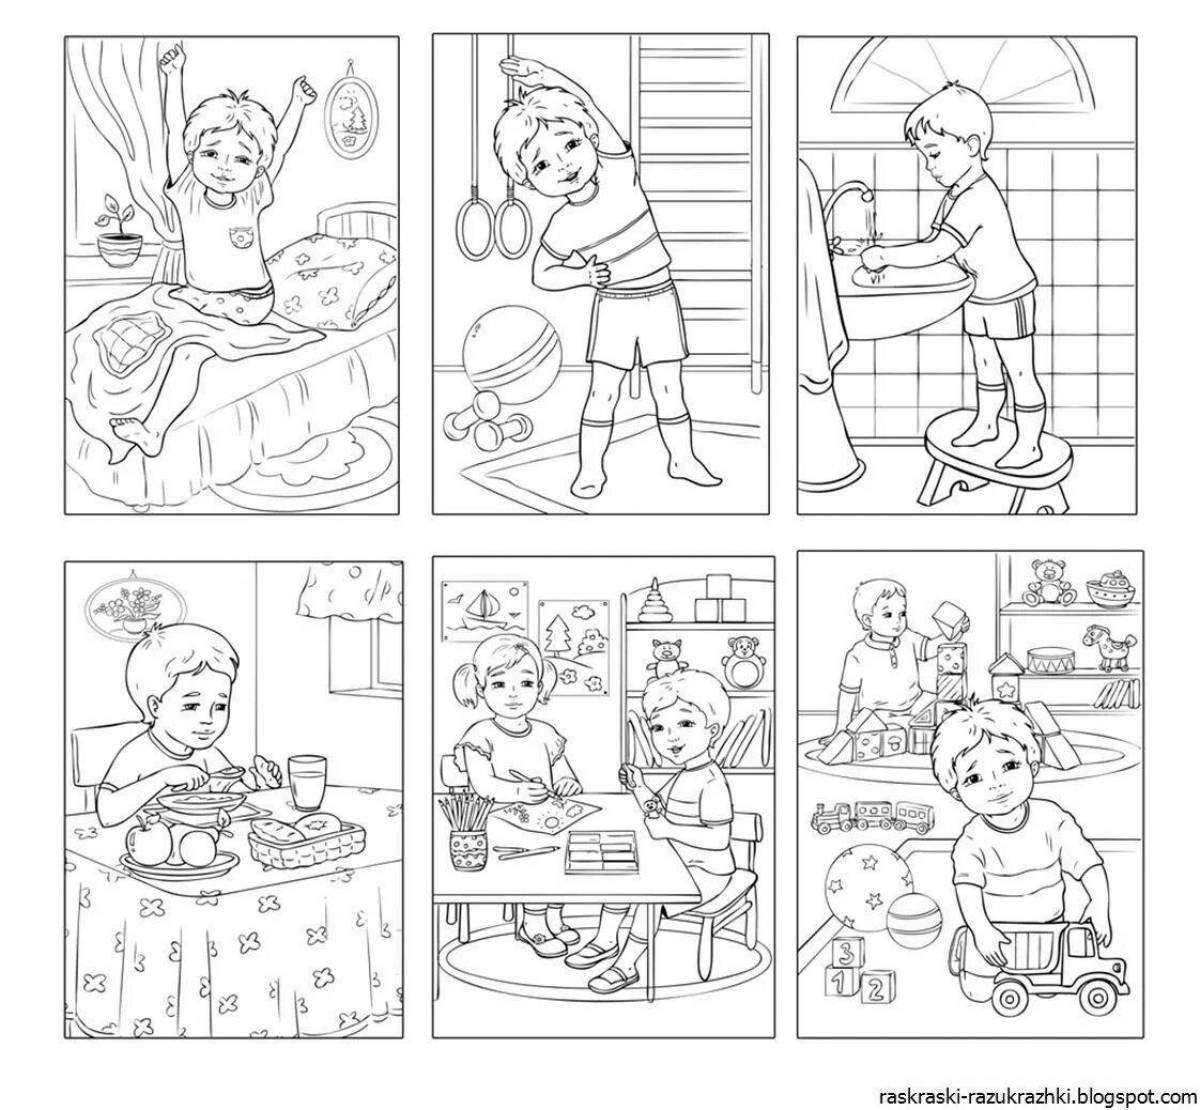 Blissful morning coloring page for kids